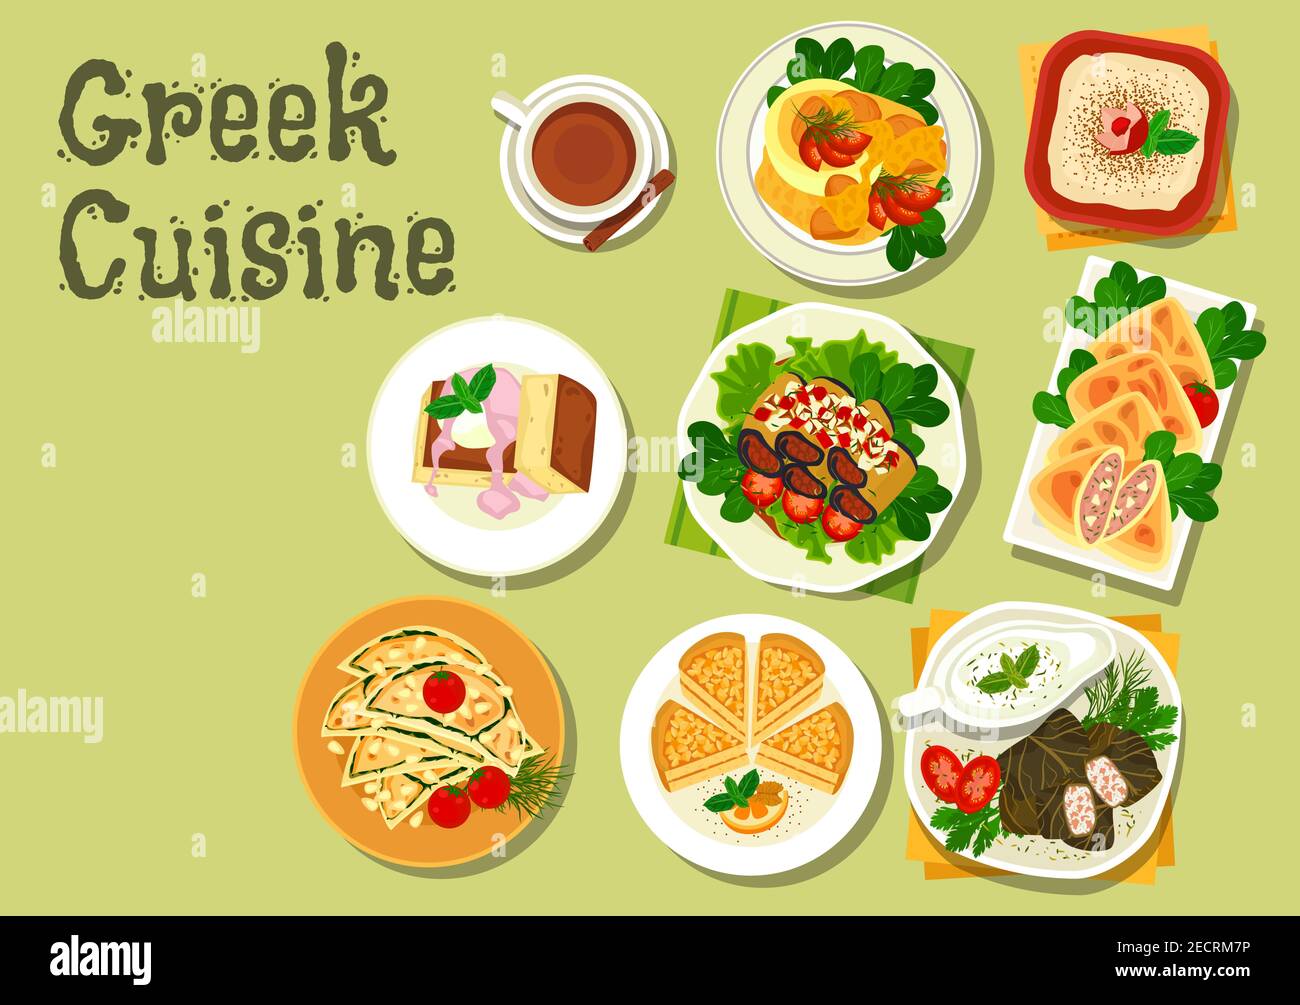 Greek cuisine lunch dishes icon with meat stew, garlic bread, stuffed grape leaf, tzatziki sauce, fish roe salad, eggplant roll, almond cake, beef and Stock Vector